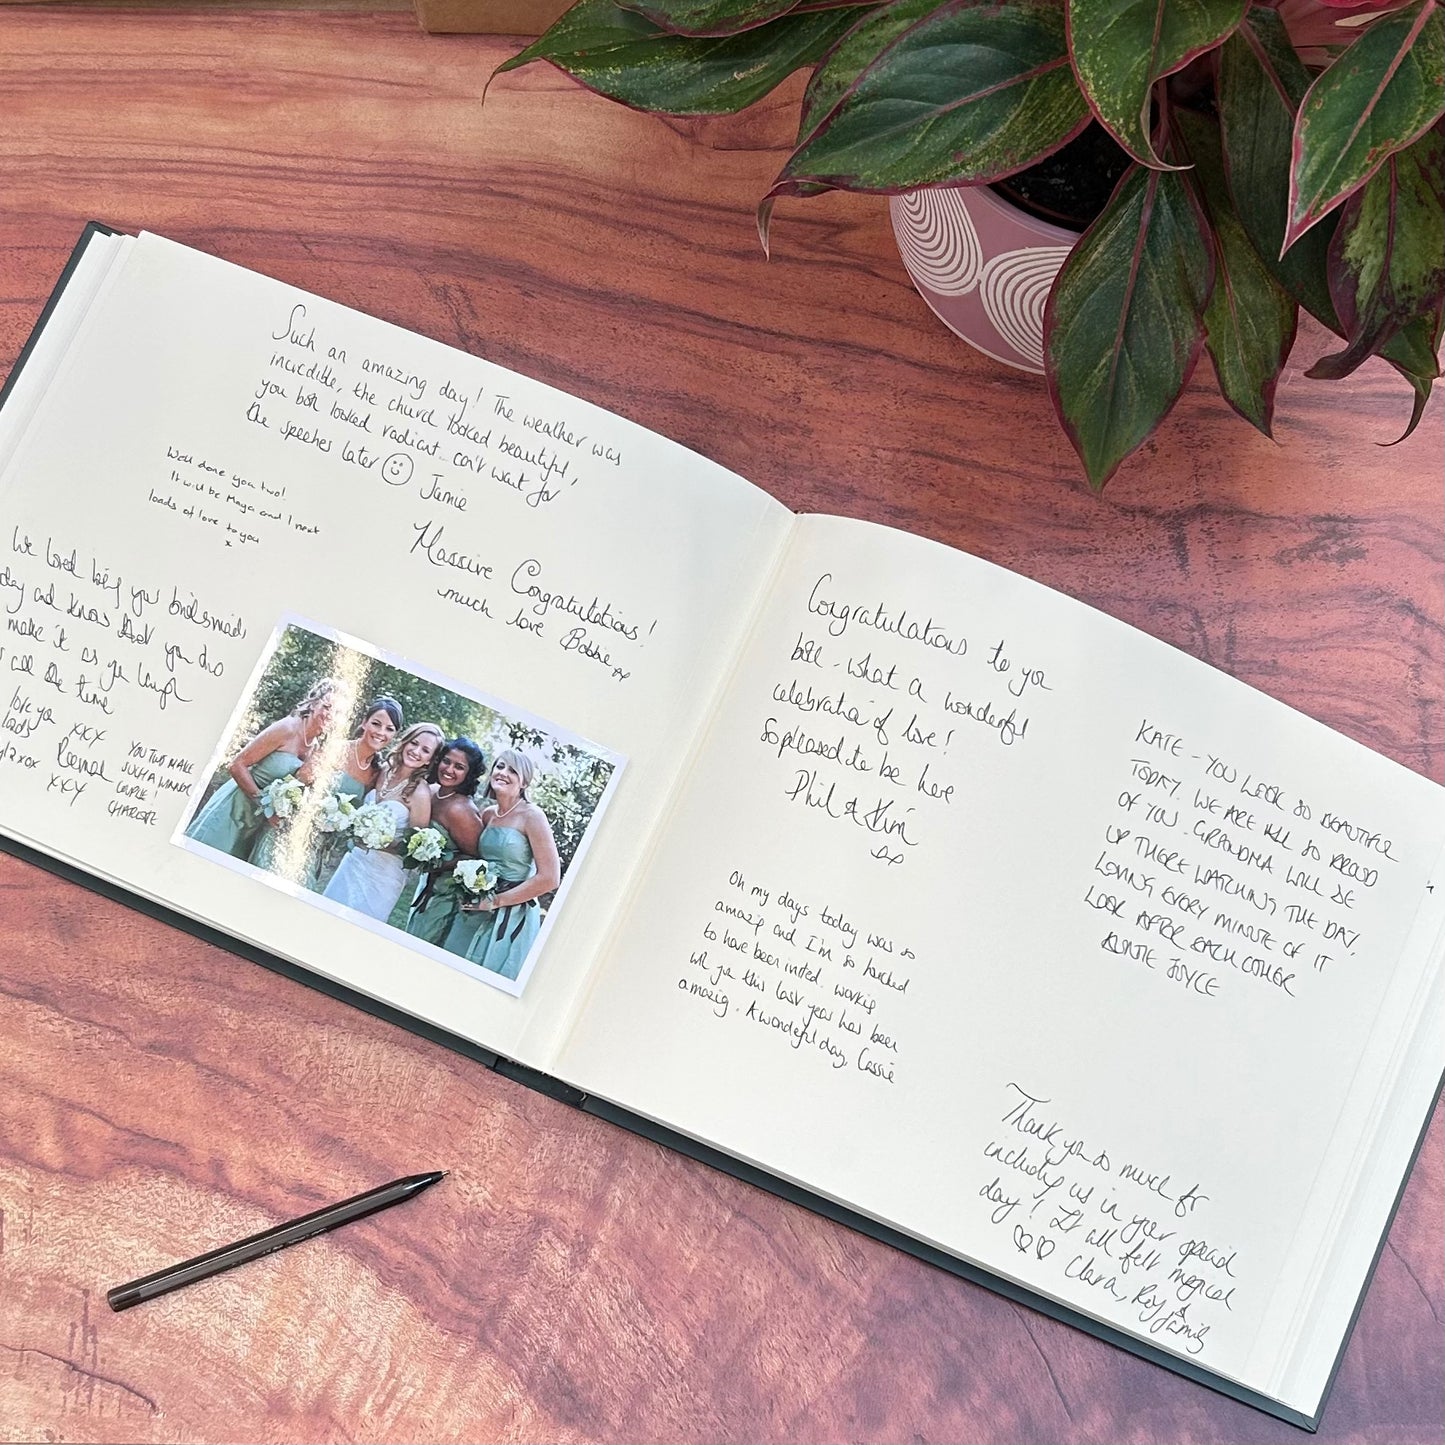 a wedding guest book lies open on a wooden table and you can see all the messages which have been written inside it. There is also a photo stuck into the guest book